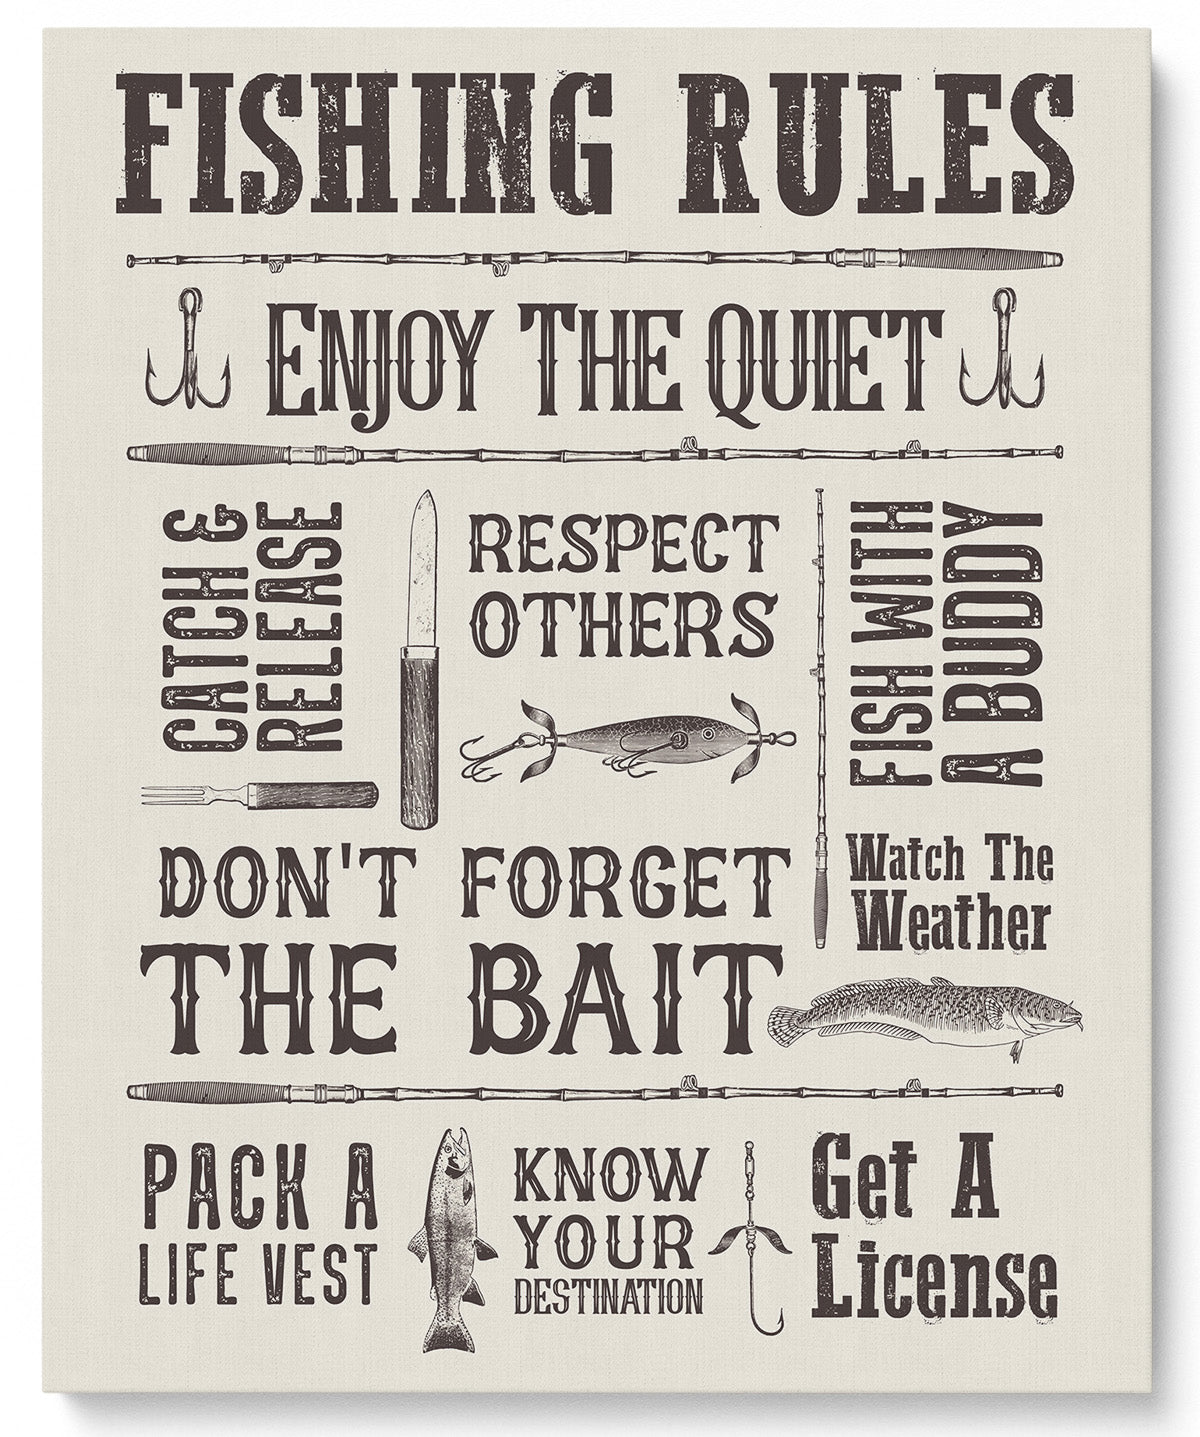 Fishing Rules - Great gift for fishing enthusiasts - fishing-themed artwork